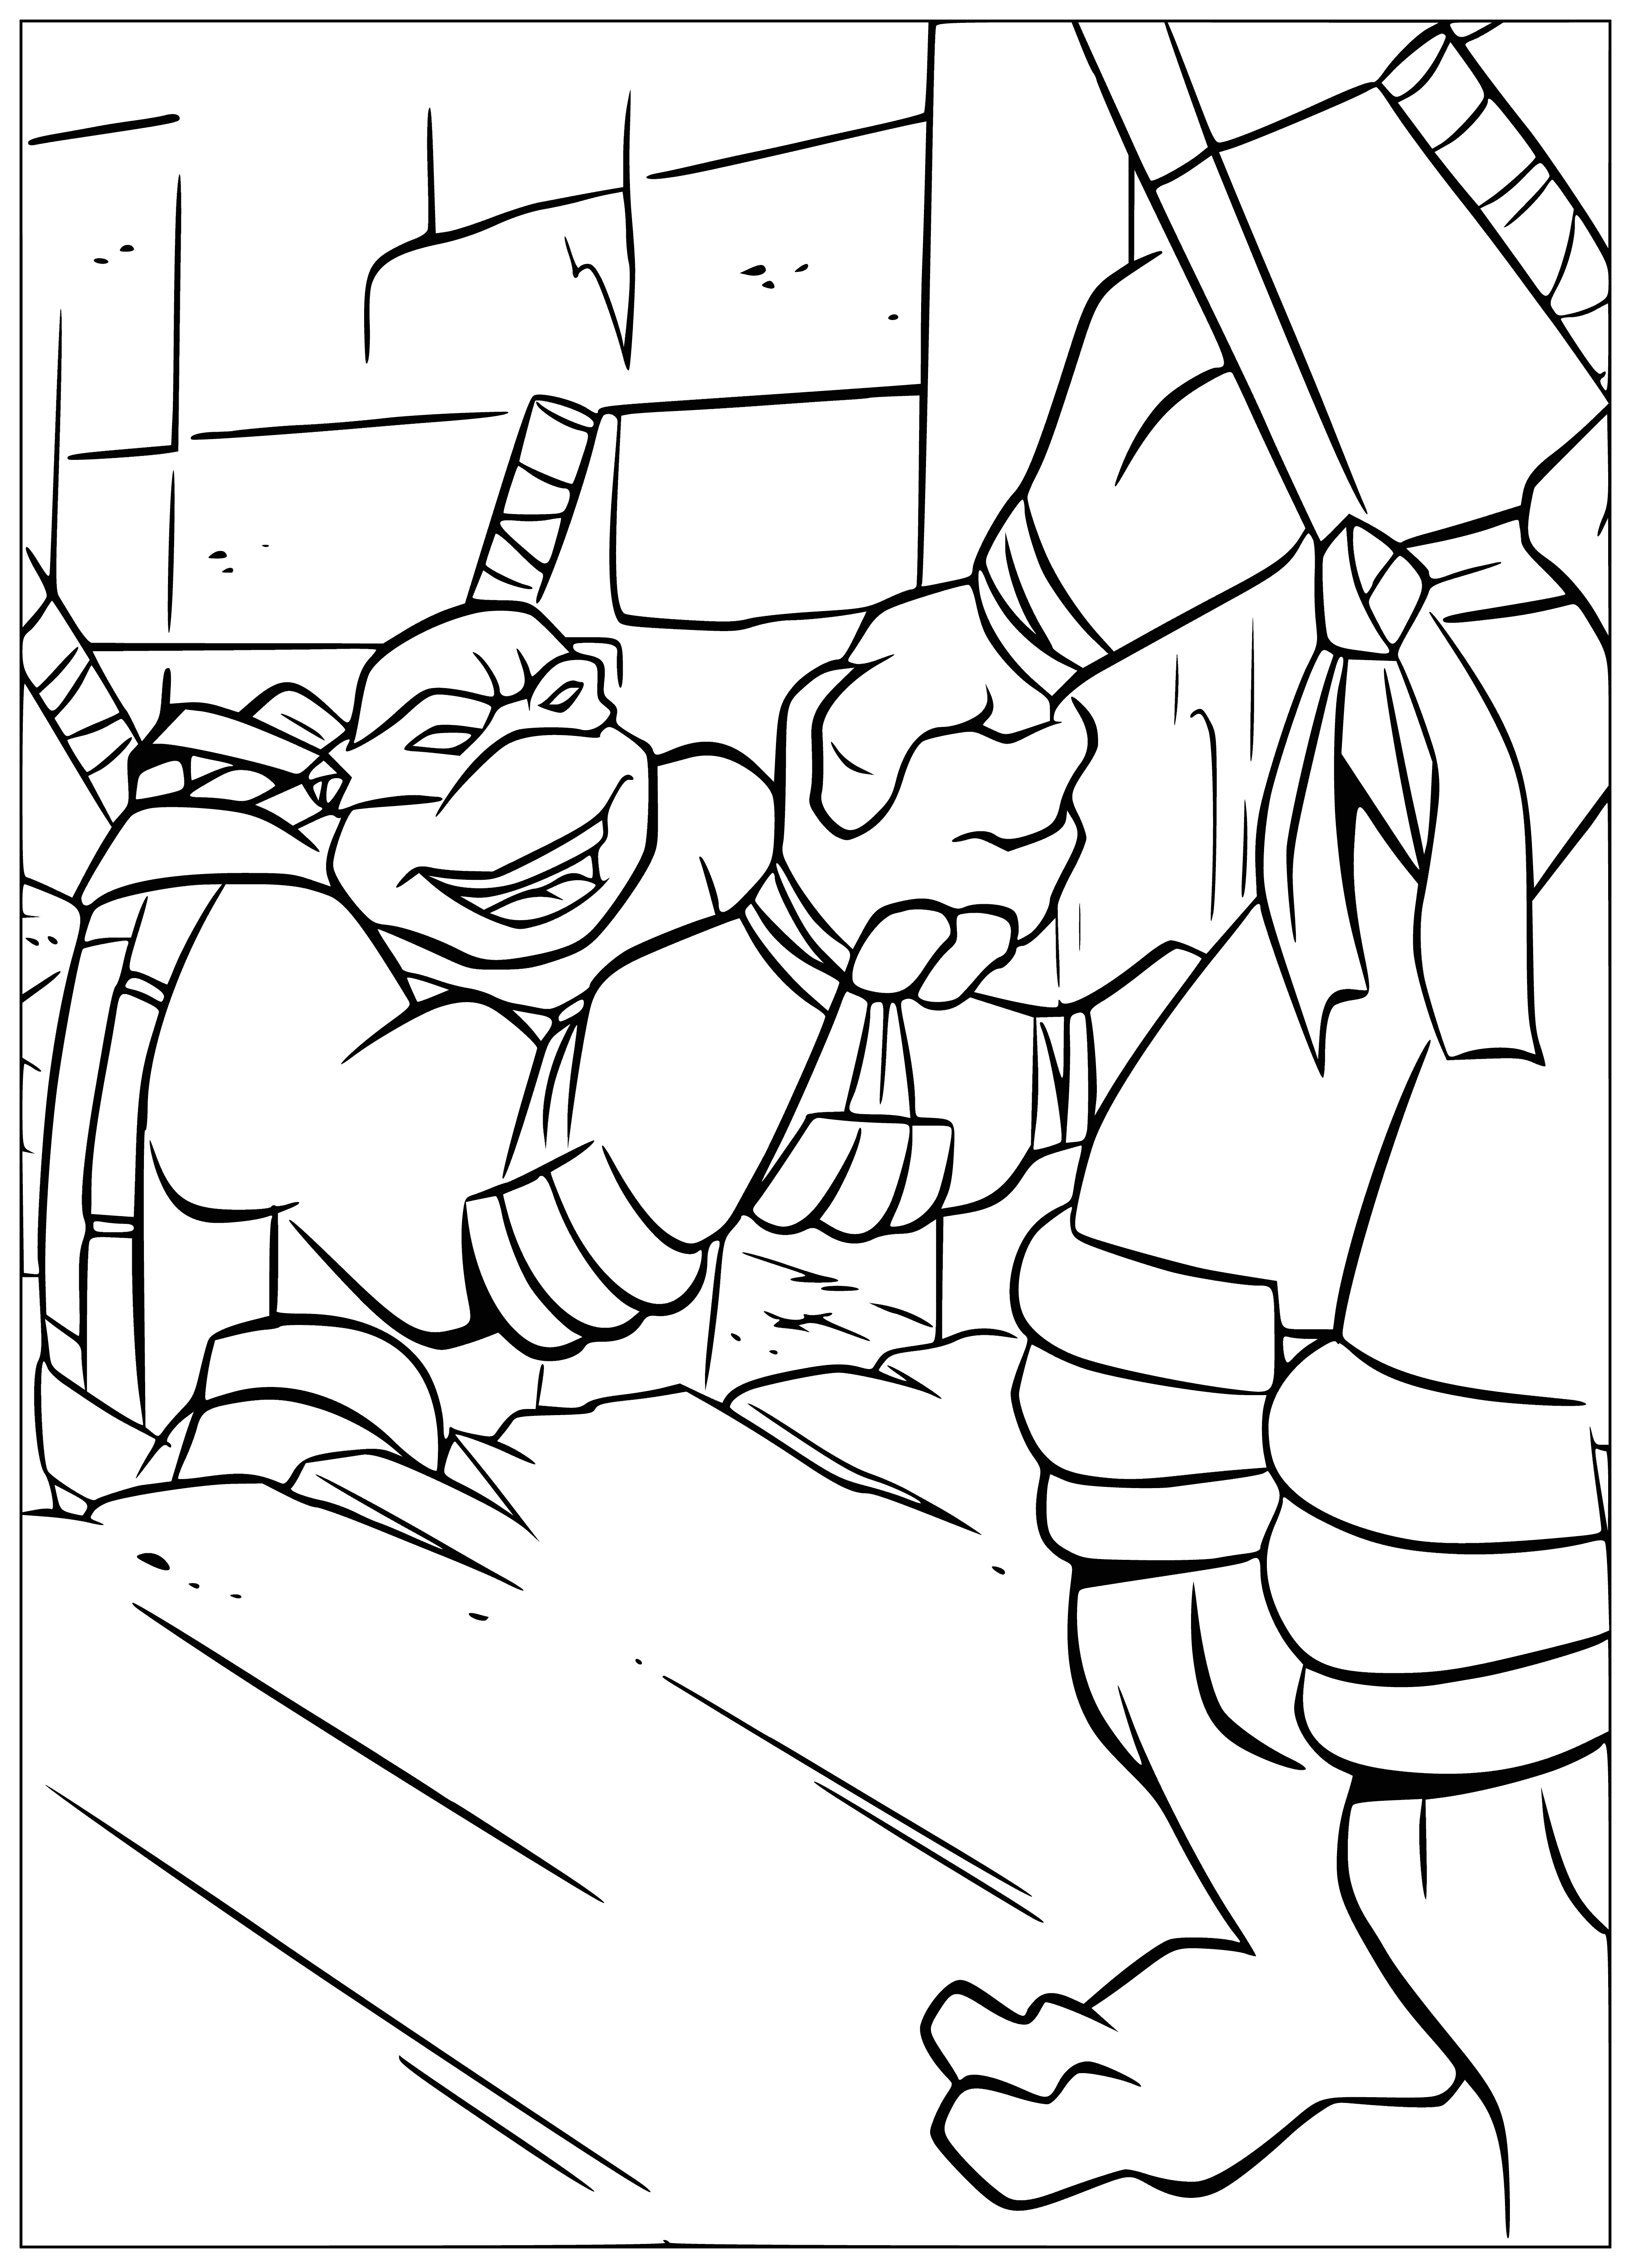 coloring page: The Ninja Turtles have different personalities, weapons & bandanas, ready to fight a brick wall. #TMNT